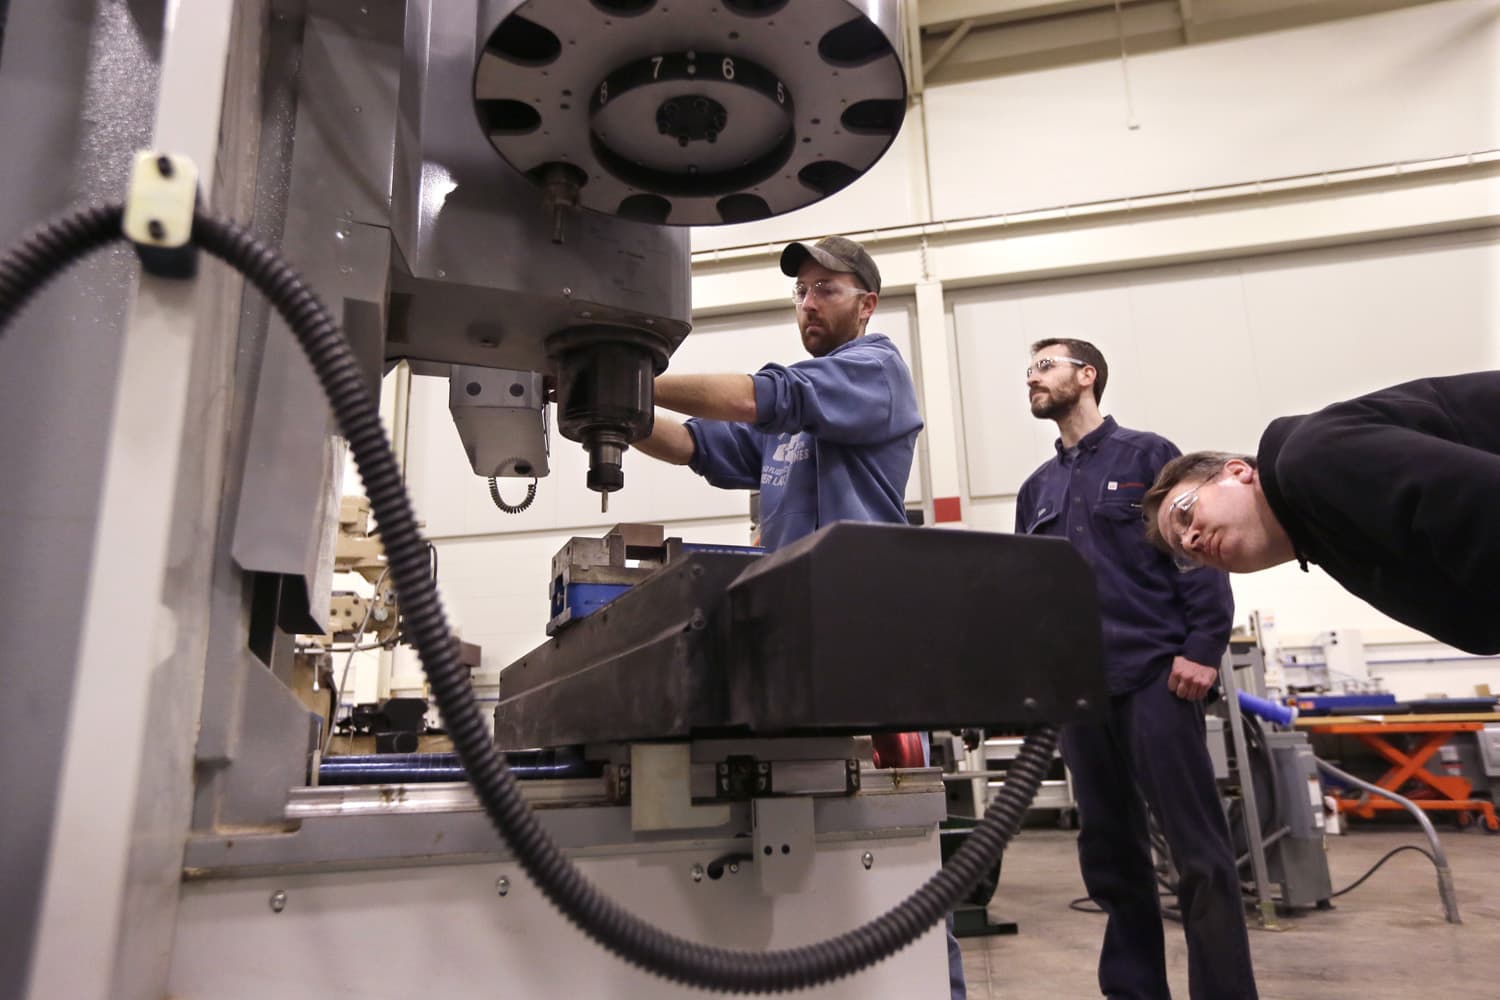 In a photo from Wednesday, Feb. 11, 2015 in Lansing, Mich., Lansing Community College, Brad Bancroft, left, operates a mill as Nate Joseph, center, and Adam Woodhams, right, look on in the advanced precision machining class. (Carlos Osorio/AP)